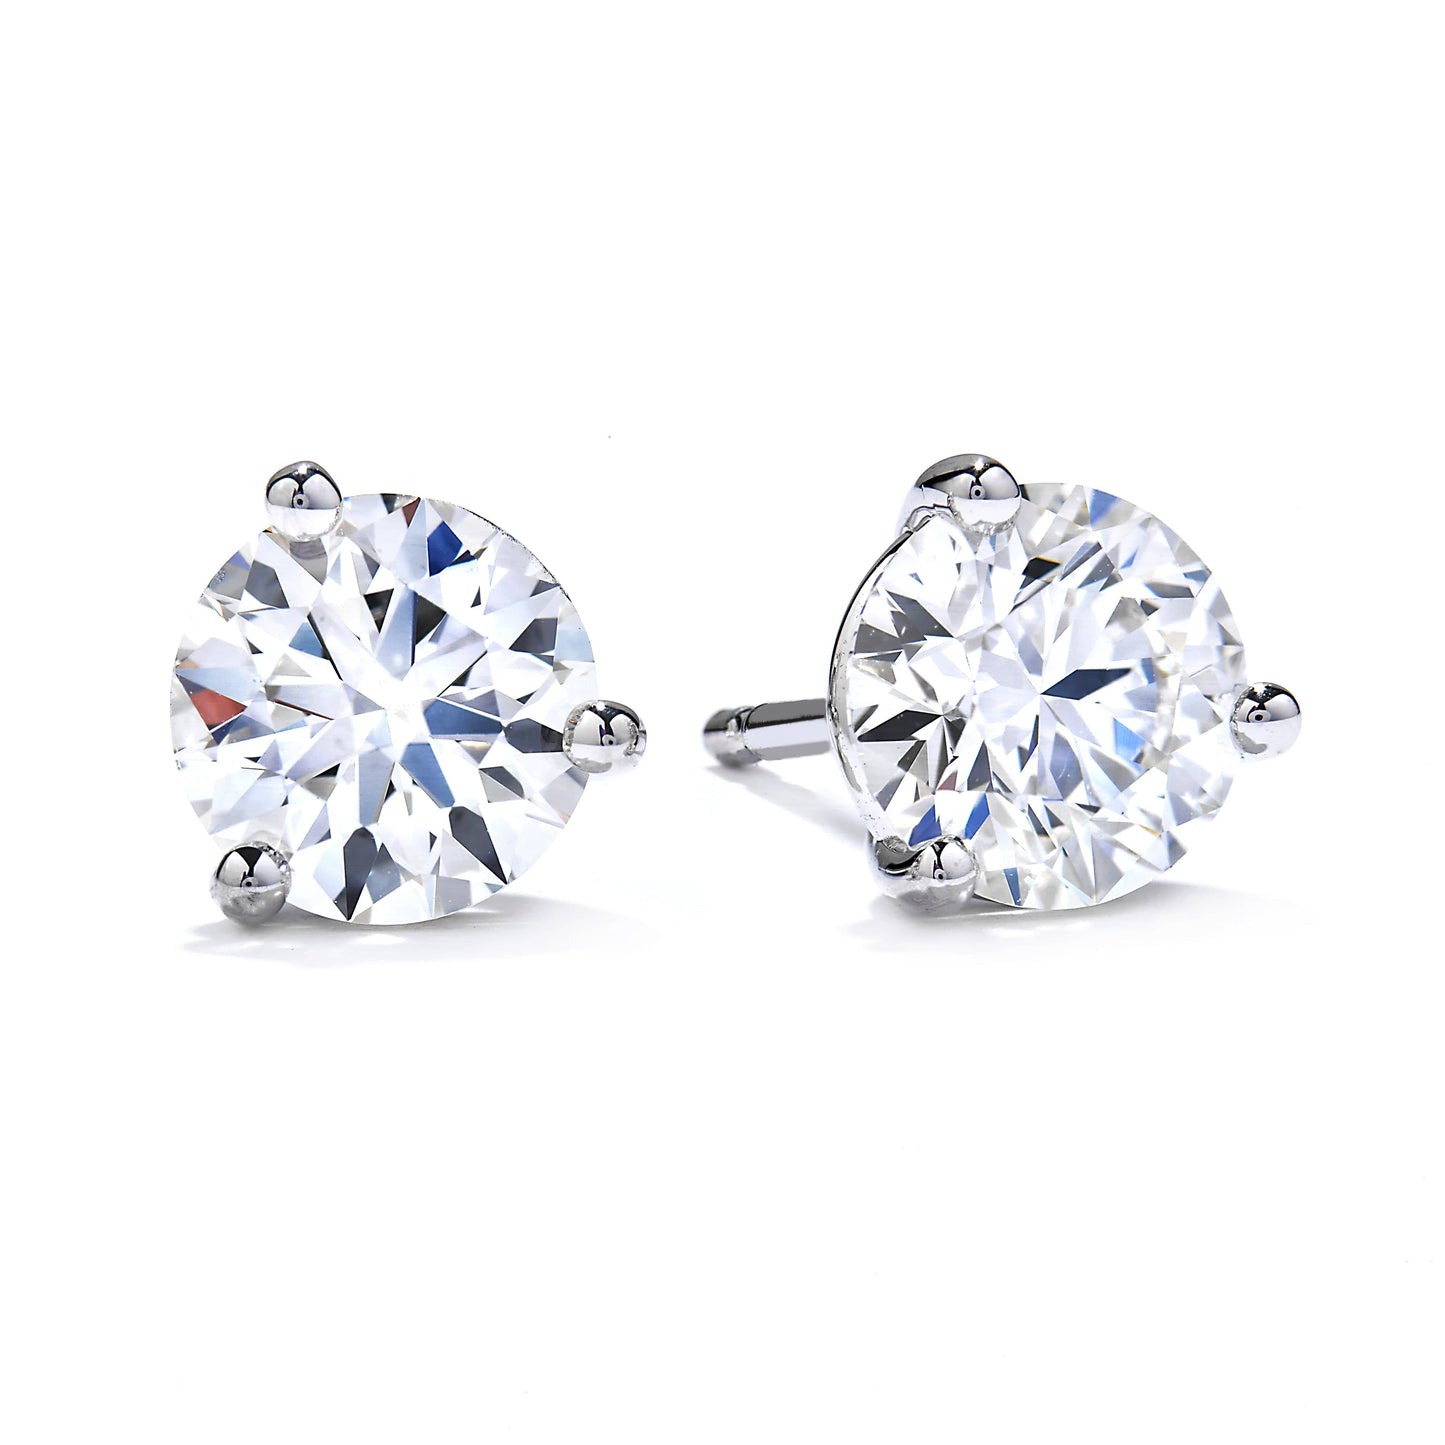 Mountz Collection 3.0CTW Diamond 3-Prong Stud Earrings in 14K White Gold